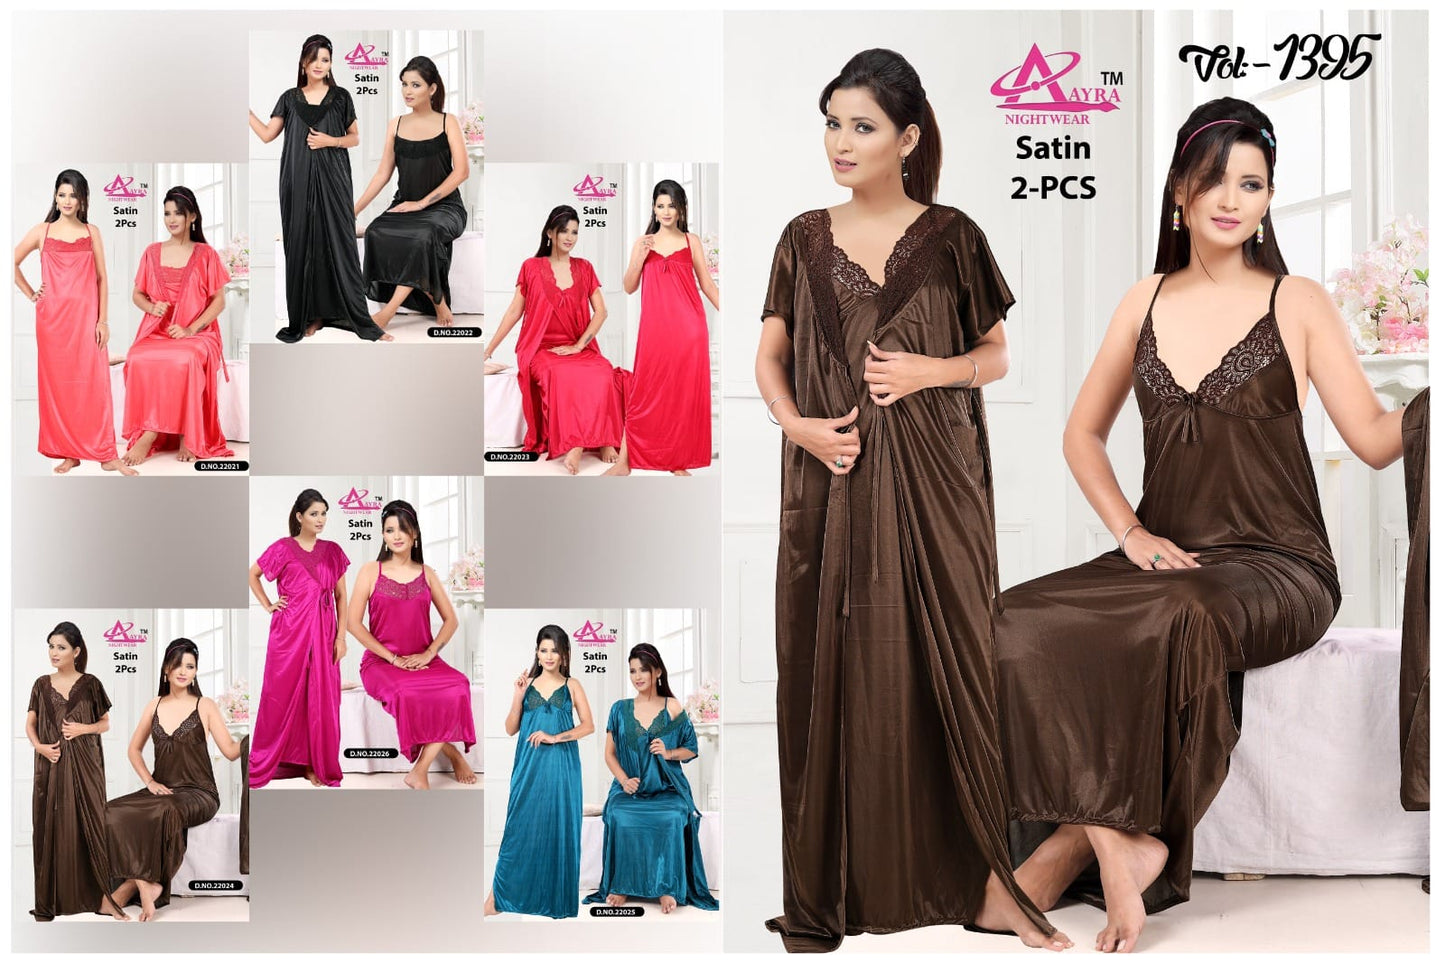 1395-1393 Aayra Satin Night Gowns